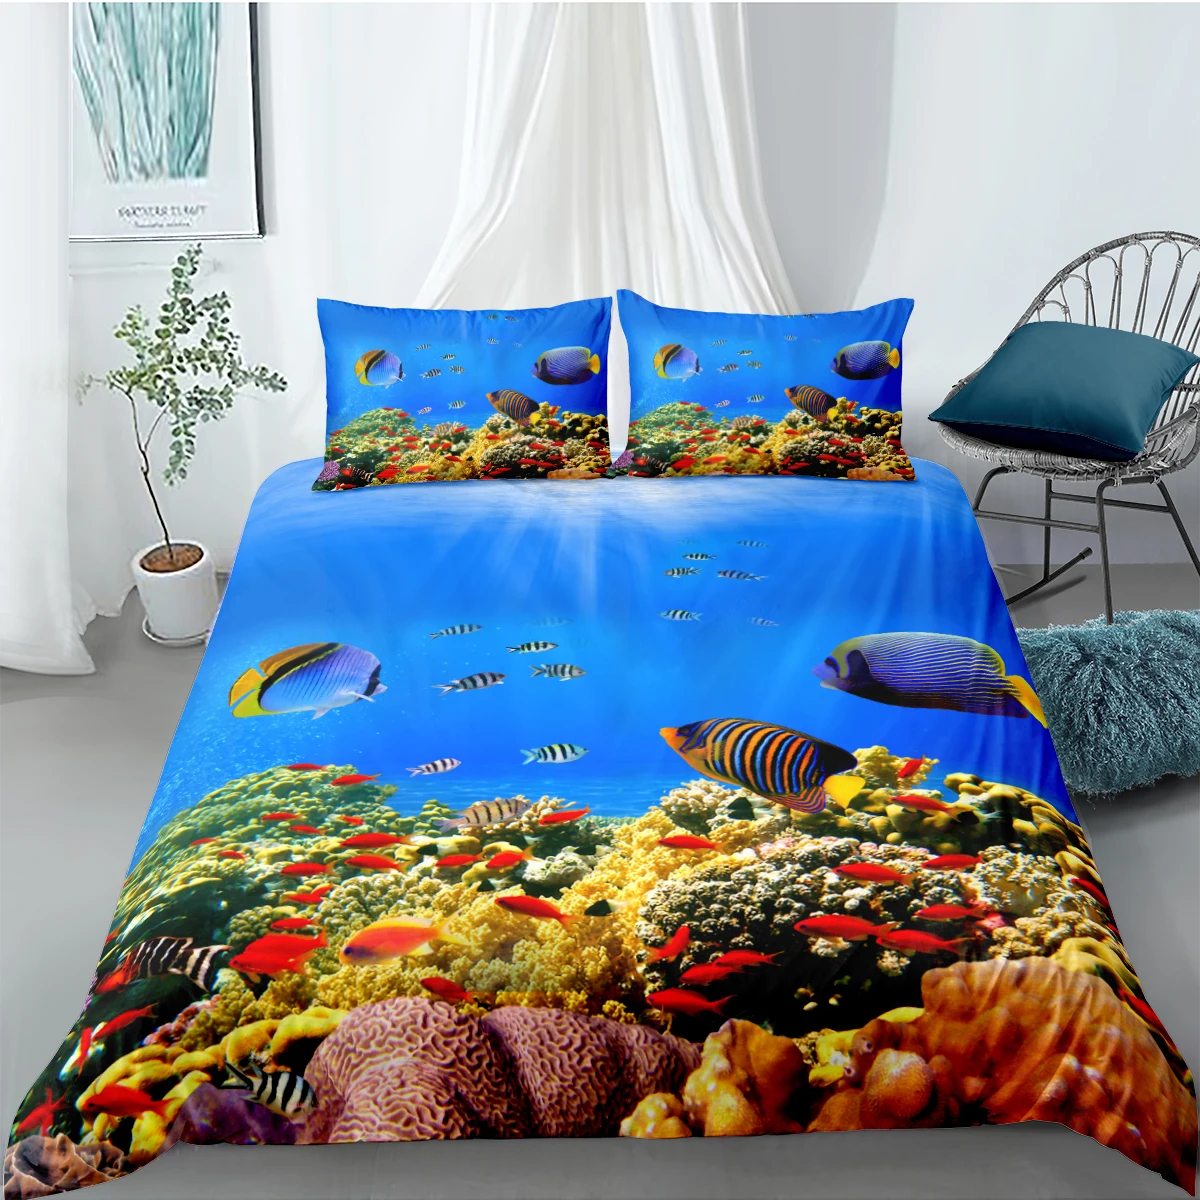 

3D Duvet Cover Sets Blue Sea Starfish Quilt Covers Comforter Case Set Bedding Set King Queen Twin Double Single Size Bed Linens